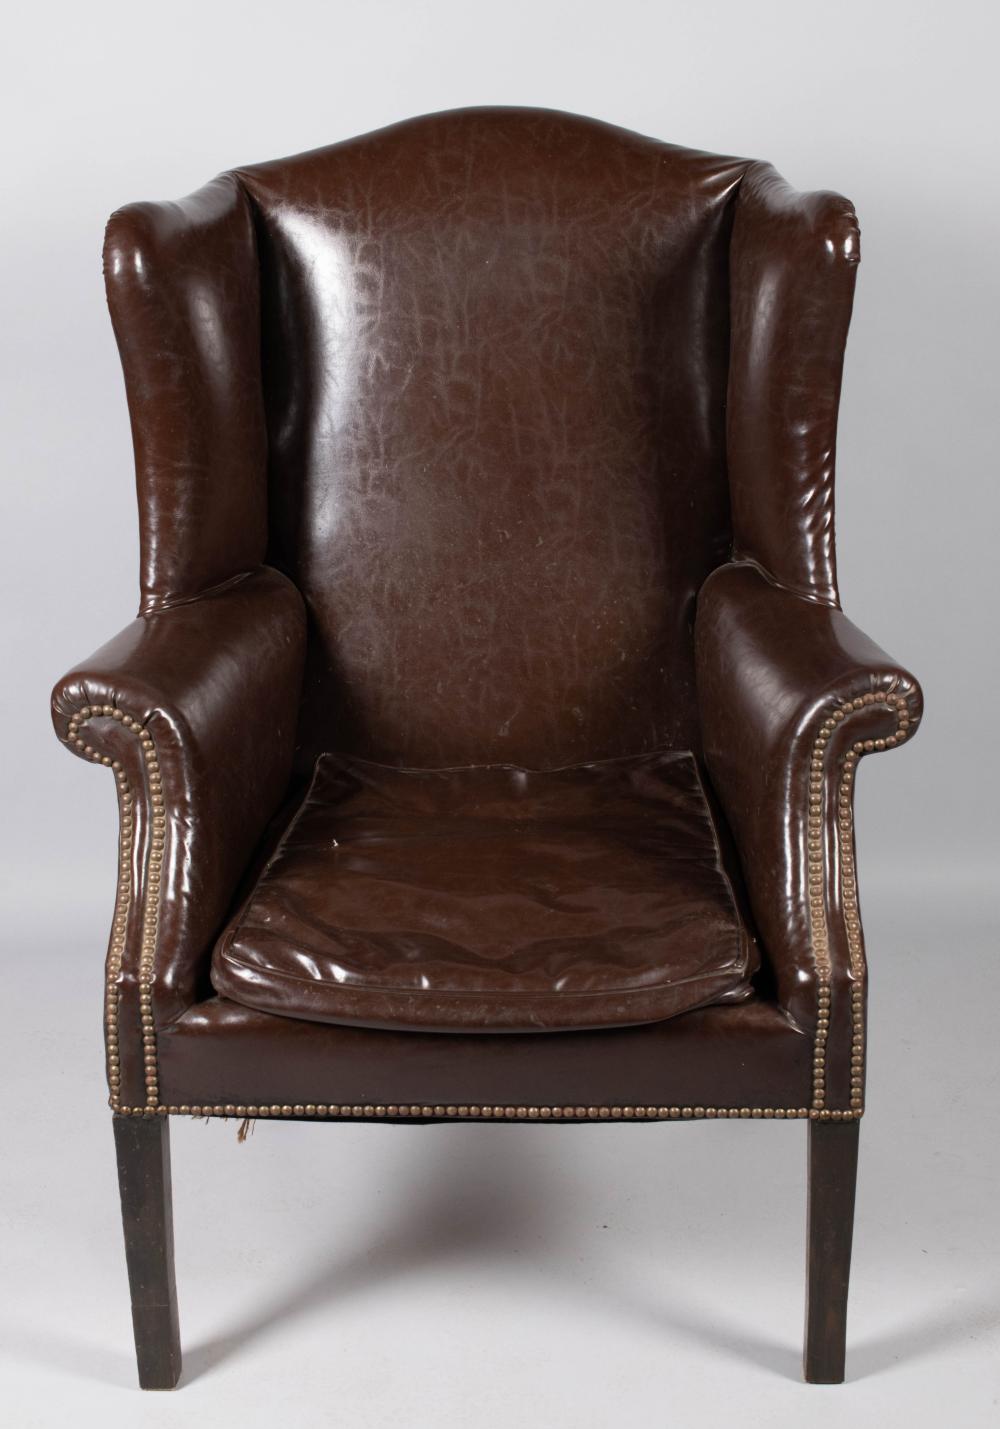 GEORGE III STYLE MAHOGANY STAINED 33d37a